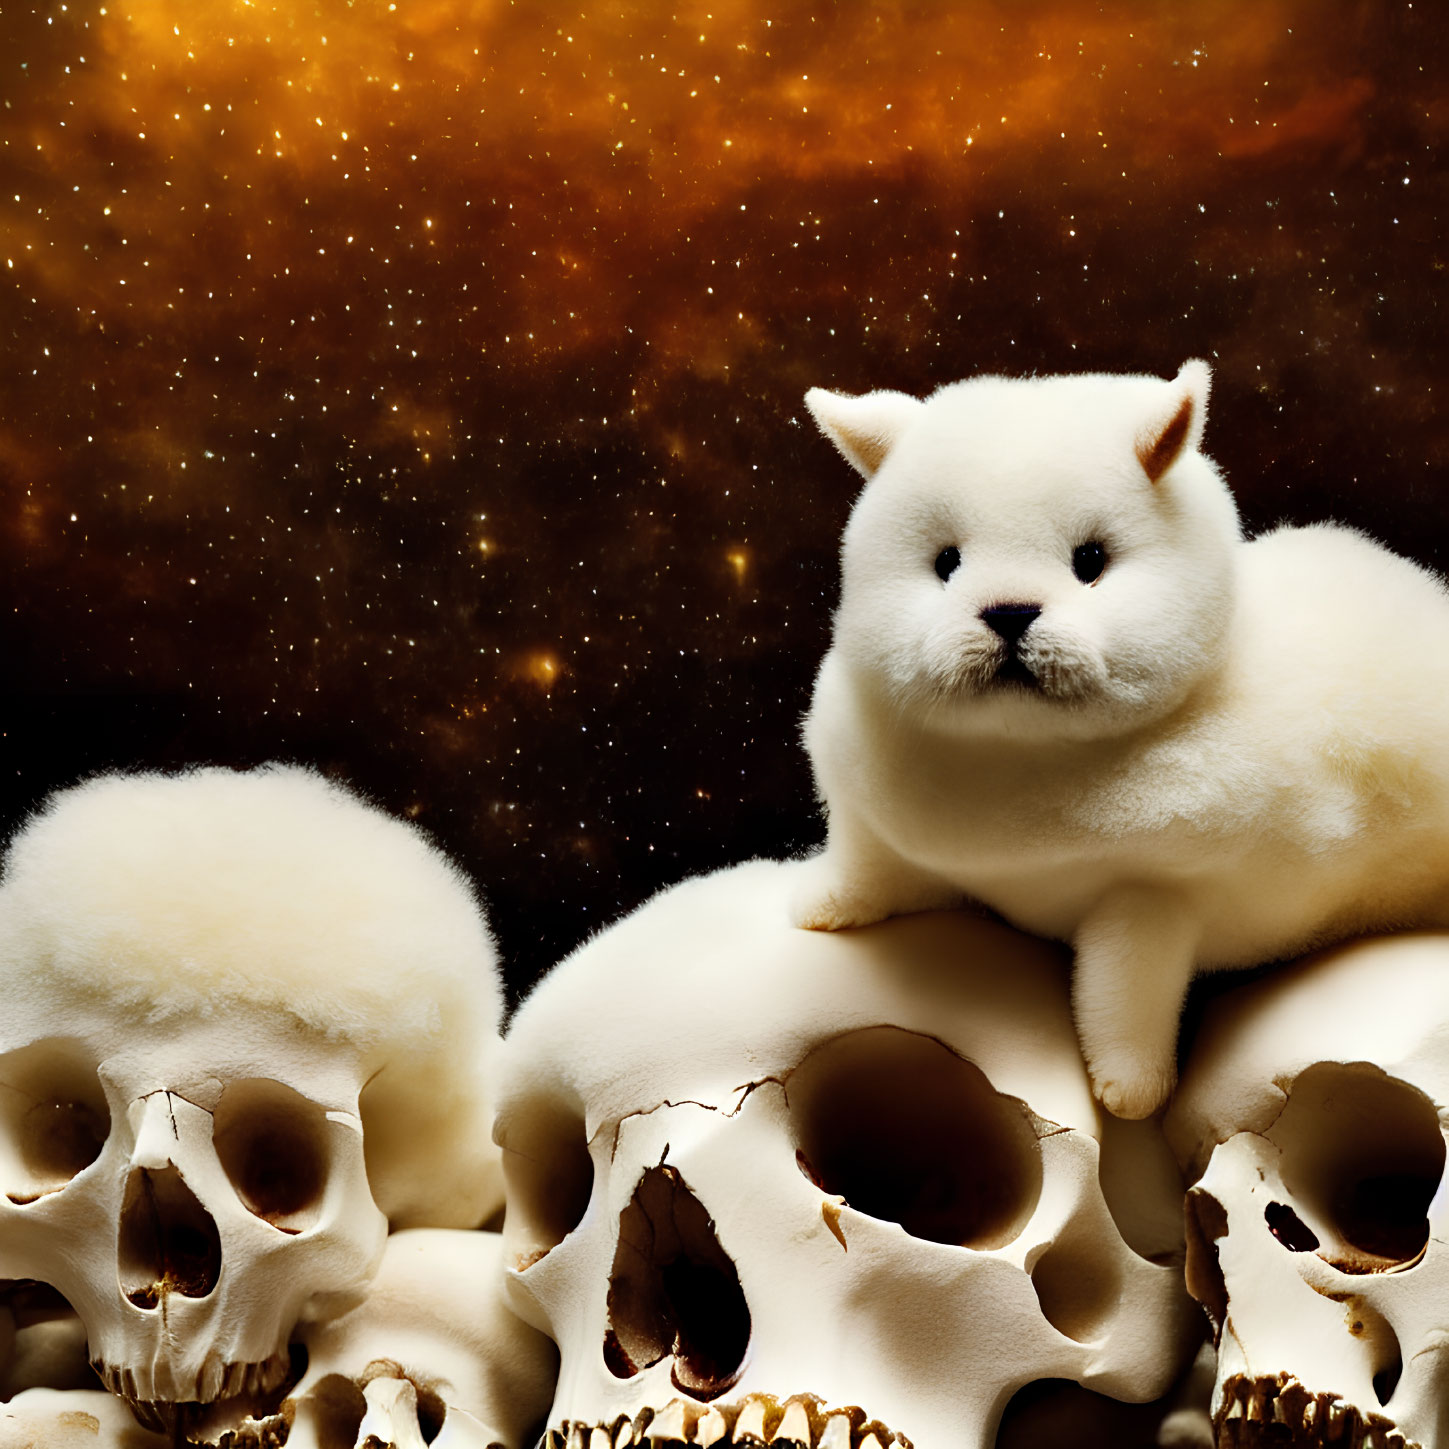 White Cat on Skull Pile with Cosmic Background